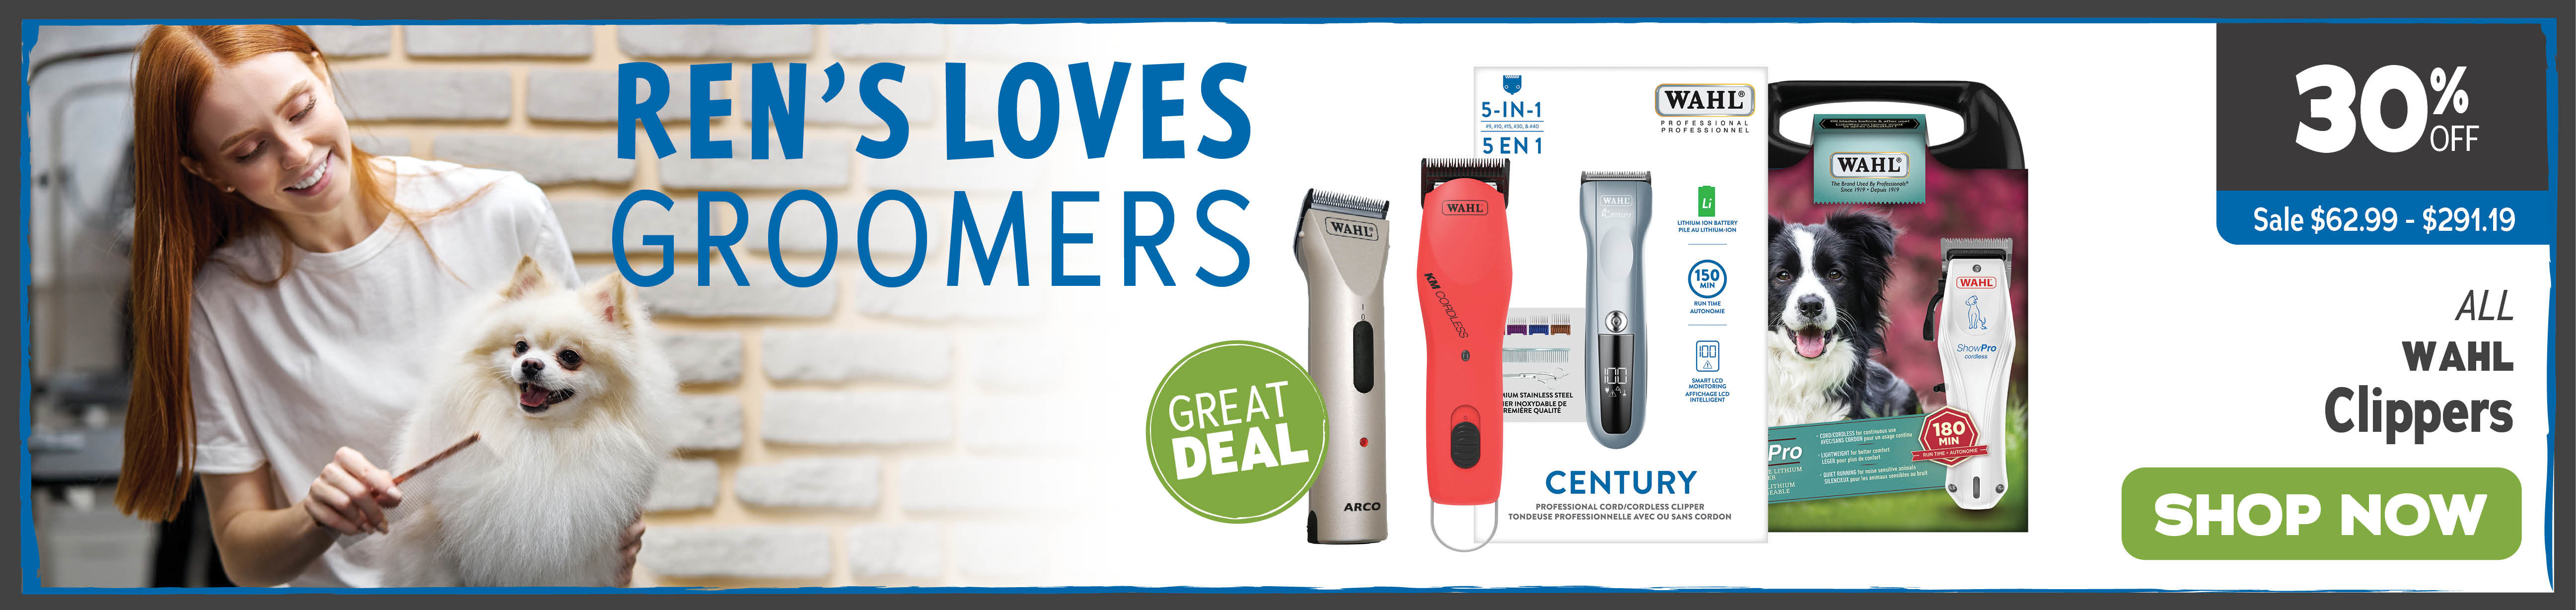 Ren's Loves Groomers Sale 30% Off All Wahl Clippers